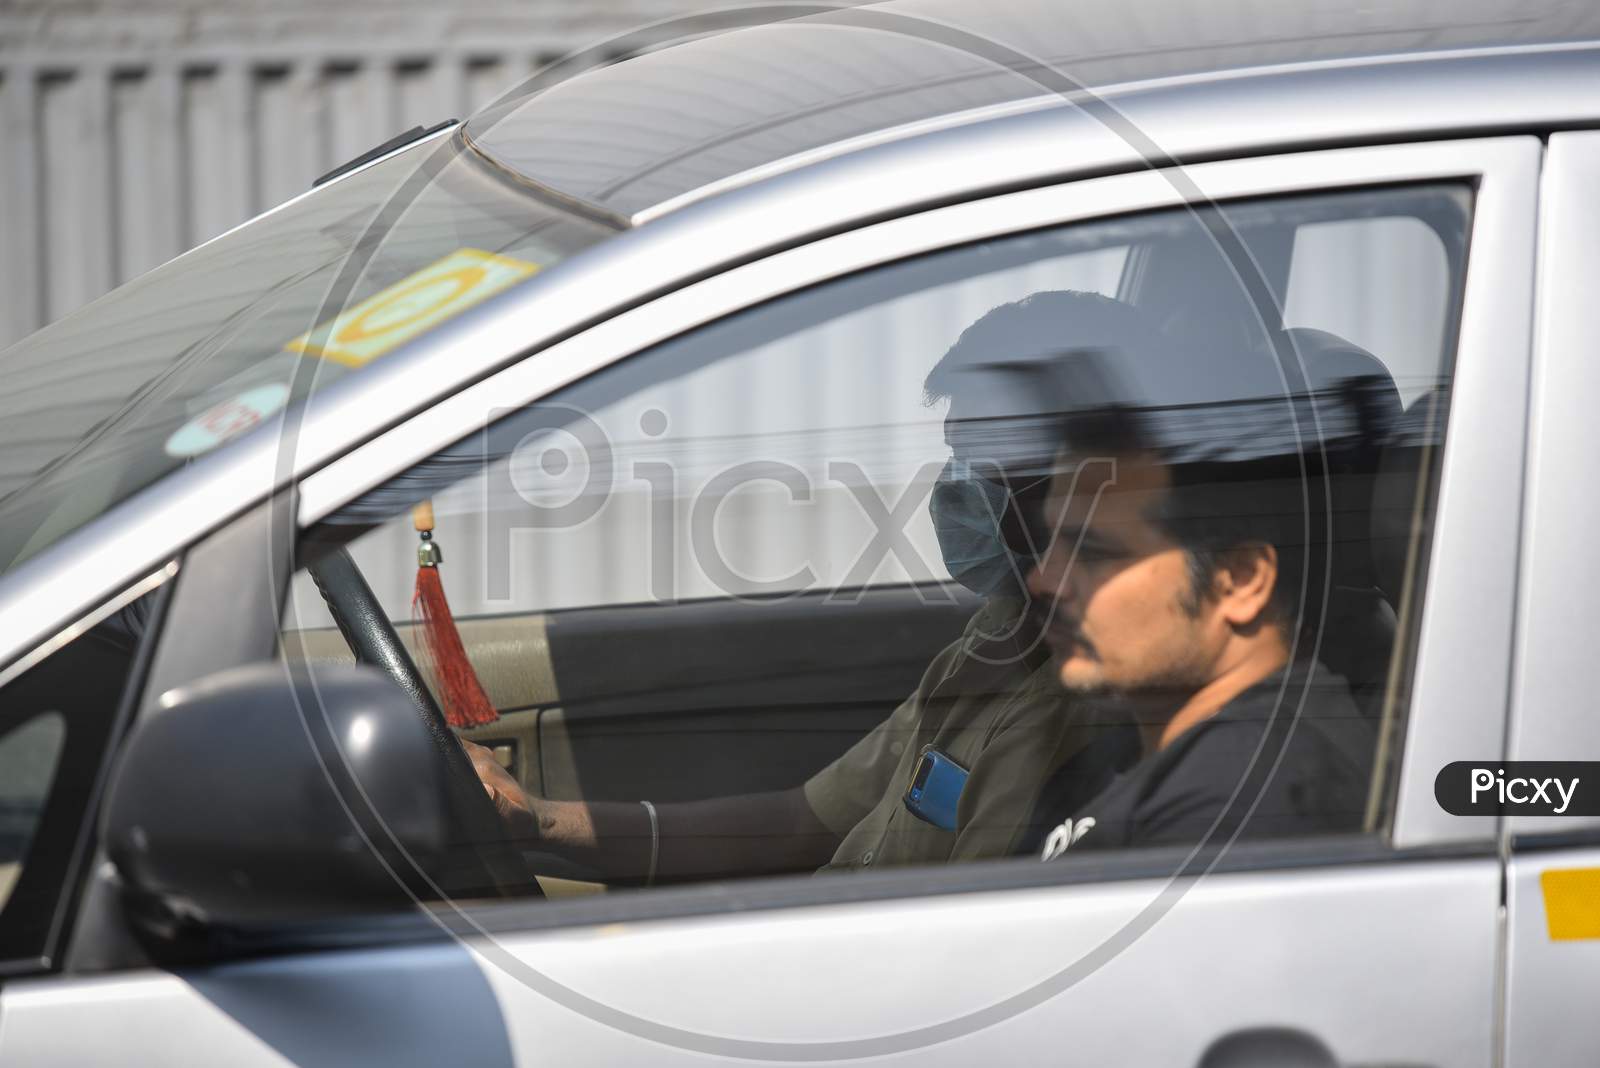 A man drives his car wearing a Face Mask amid Novel Corona Virus Outbreak in Hyderabad, COVID-19